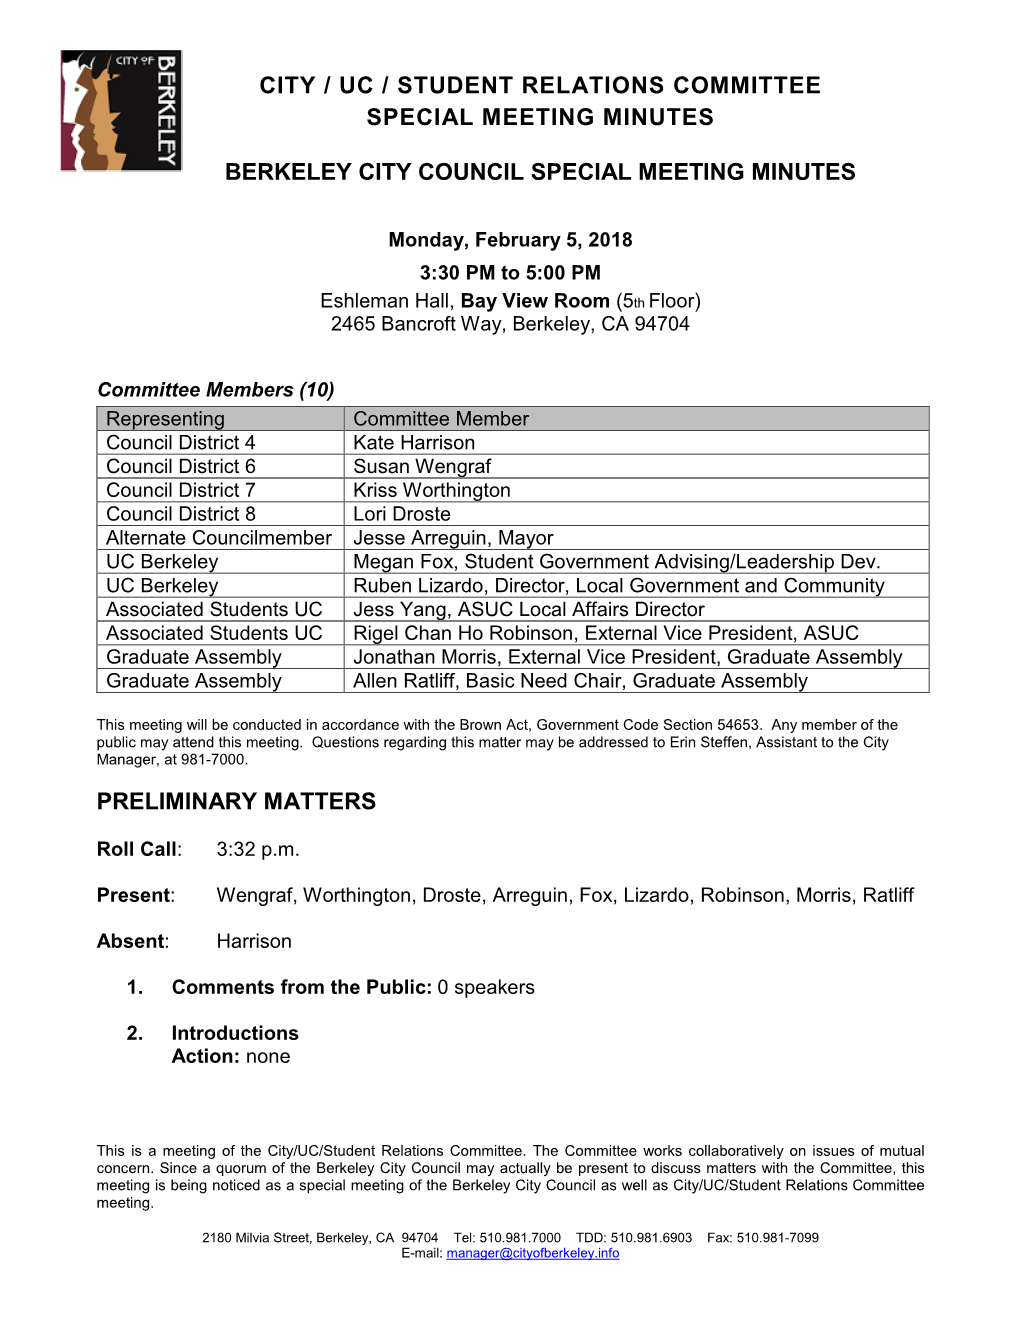 City / Uc / Student Relations Committee Special Meeting Minutes Berkeley